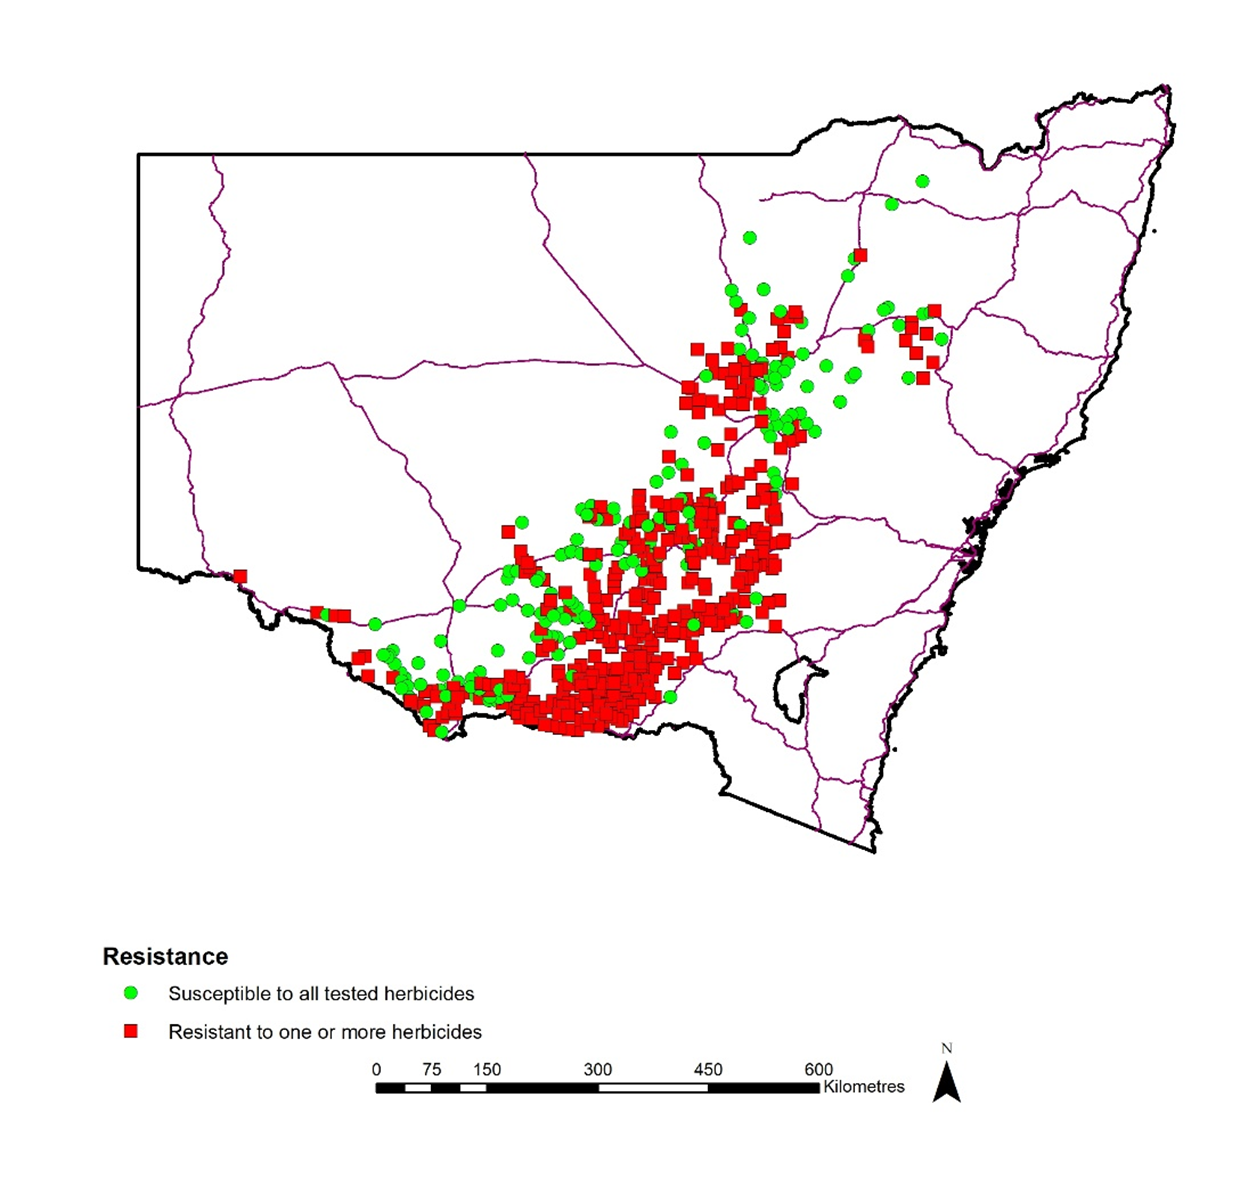 This figure is a map of NSW showing the distribution of northern region annual ryegrass populations that are susceptible (green circles) or resistant (red squares) to one or more herbicides.